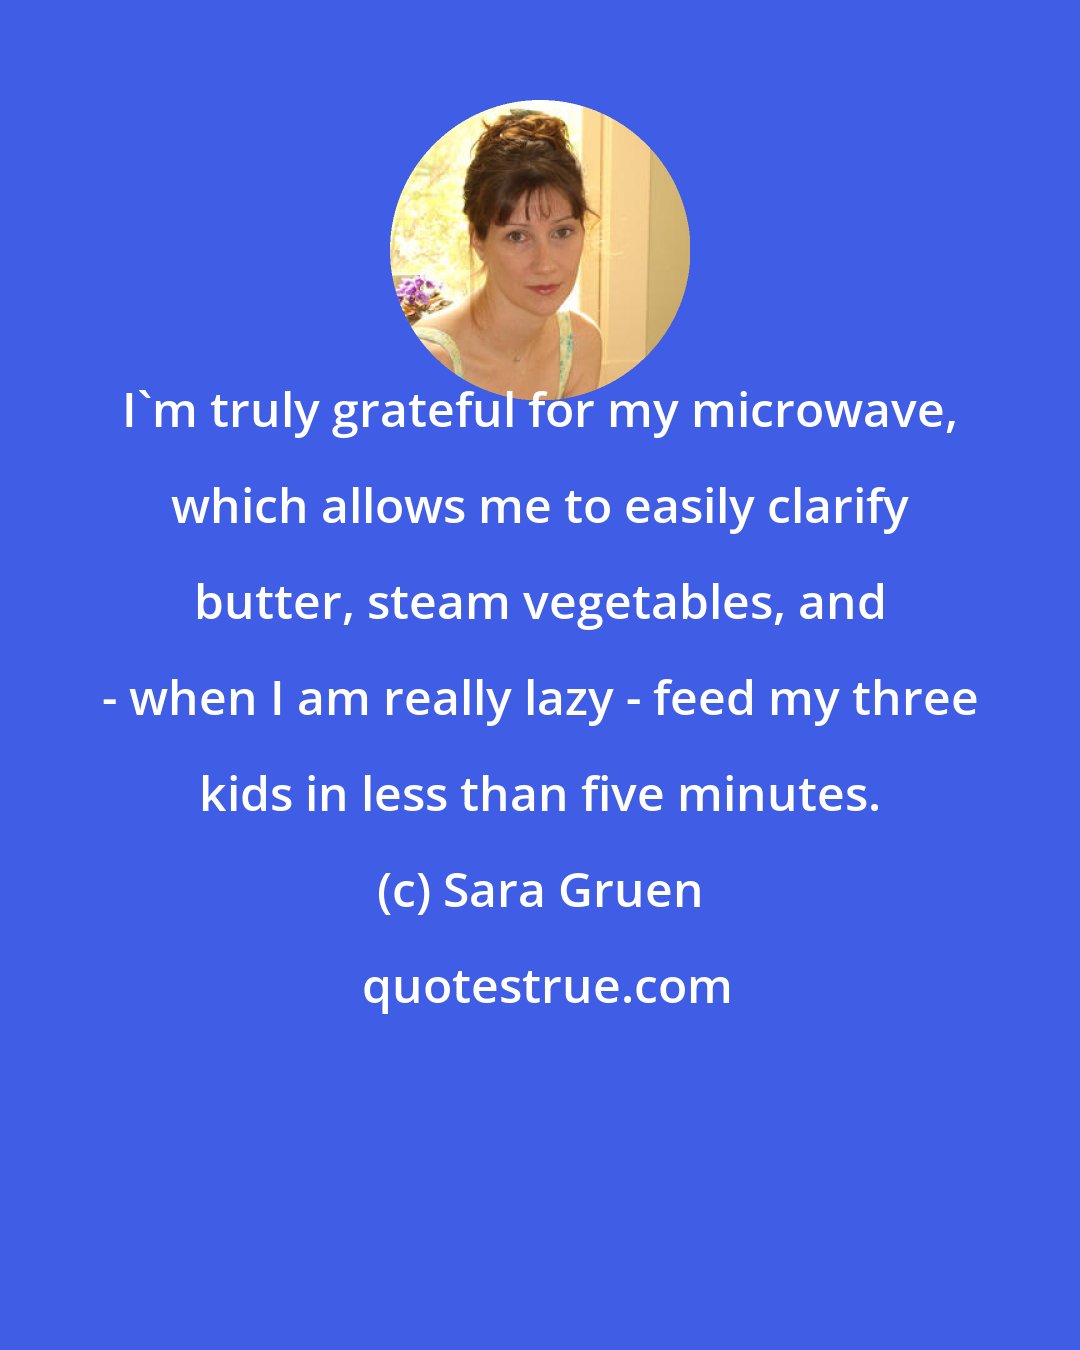 Sara Gruen: I'm truly grateful for my microwave, which allows me to easily clarify butter, steam vegetables, and - when I am really lazy - feed my three kids in less than five minutes.